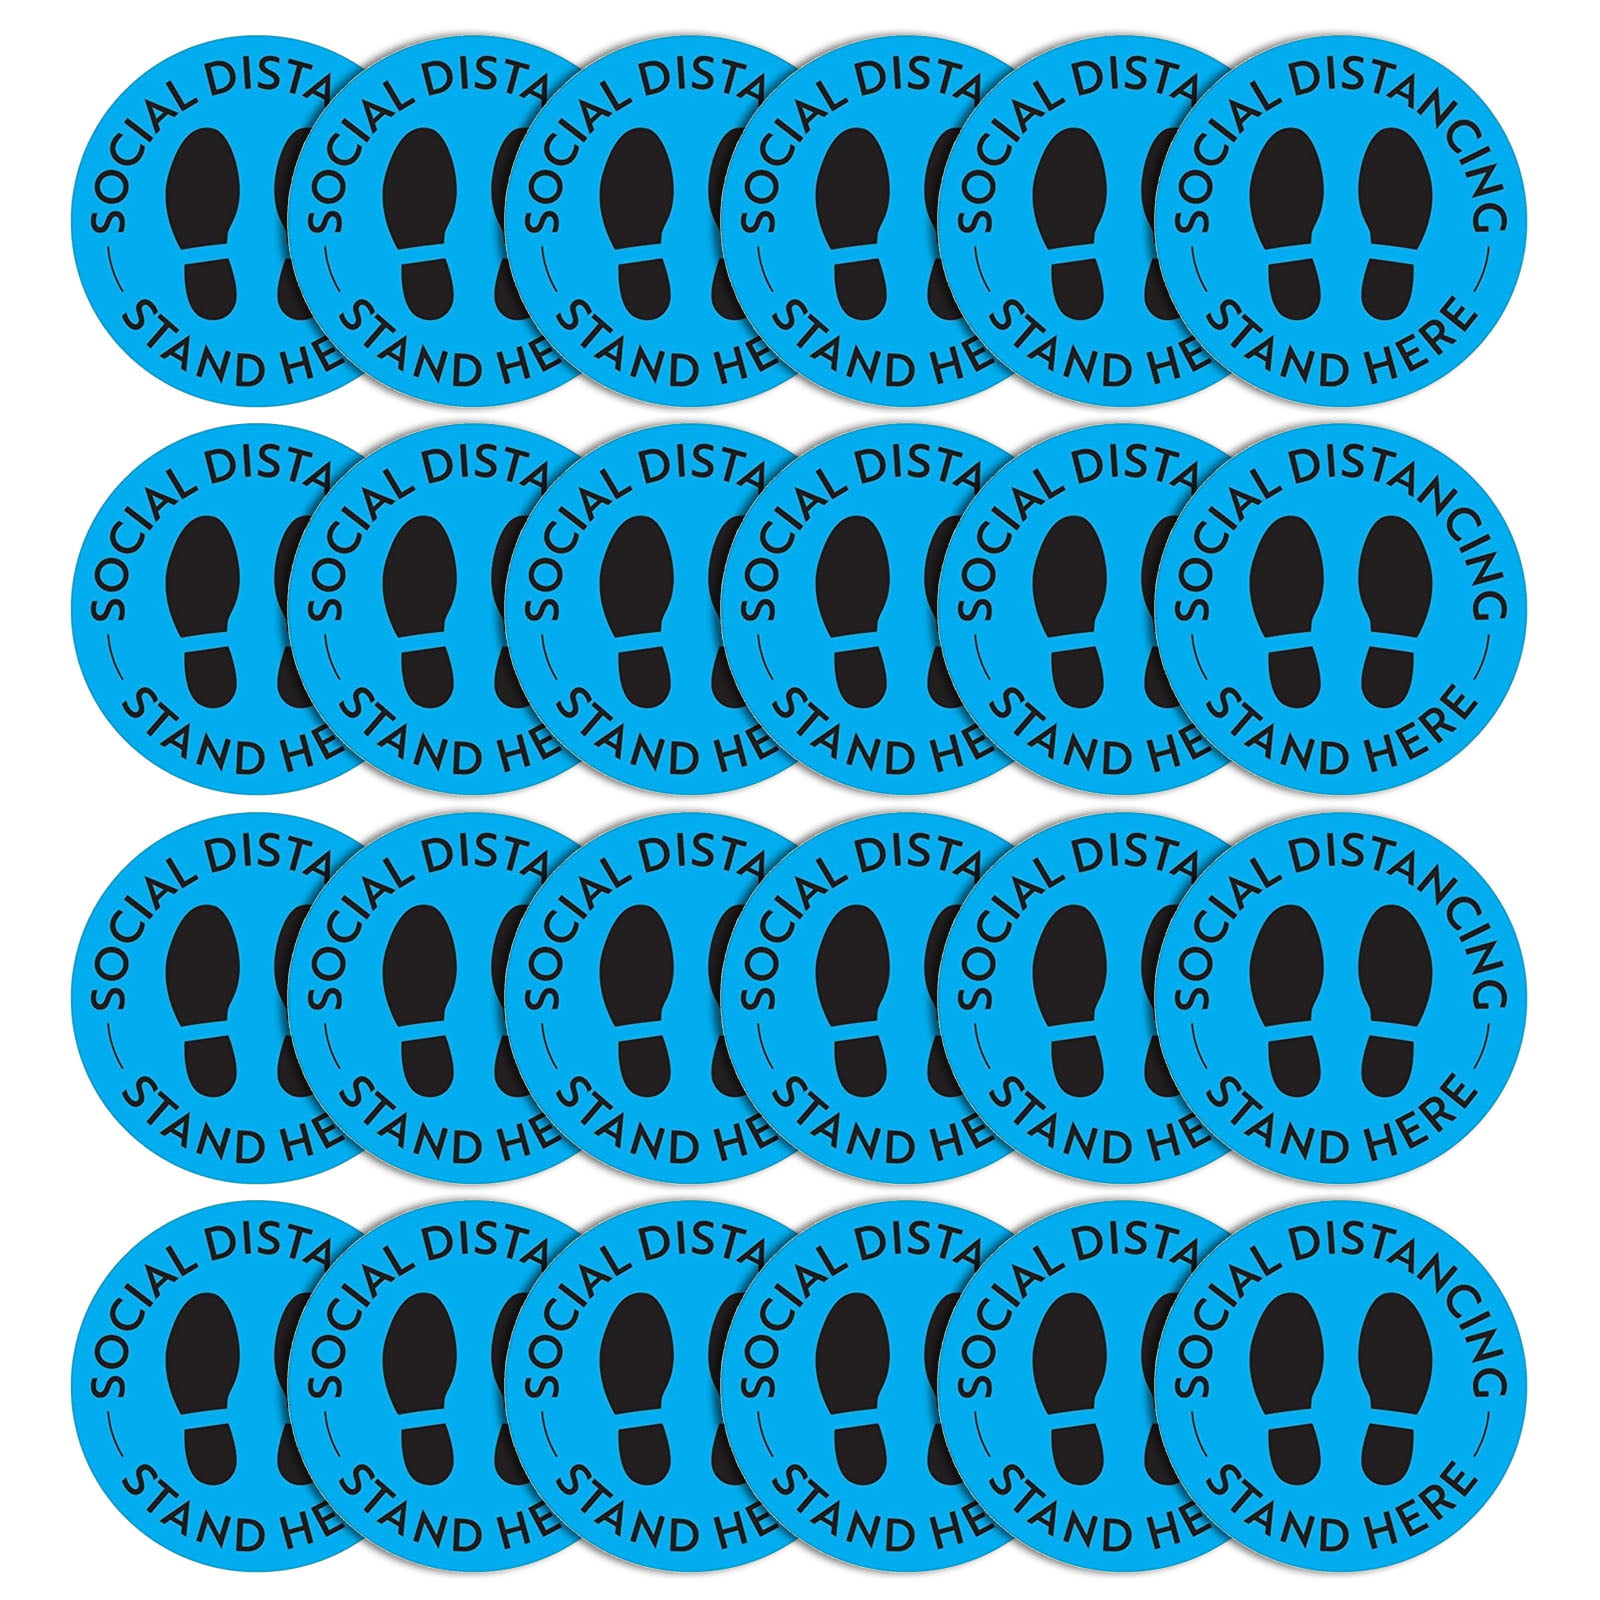 Wait Here Sign Safety Distance of 6 Feet Specialized Sticker Markers Grocery Social Distancing Floor Decal Stickers Bank Pharmacy Lab. for Crowd Control Guidance 30 Pack 8 Blue Stand Decal 